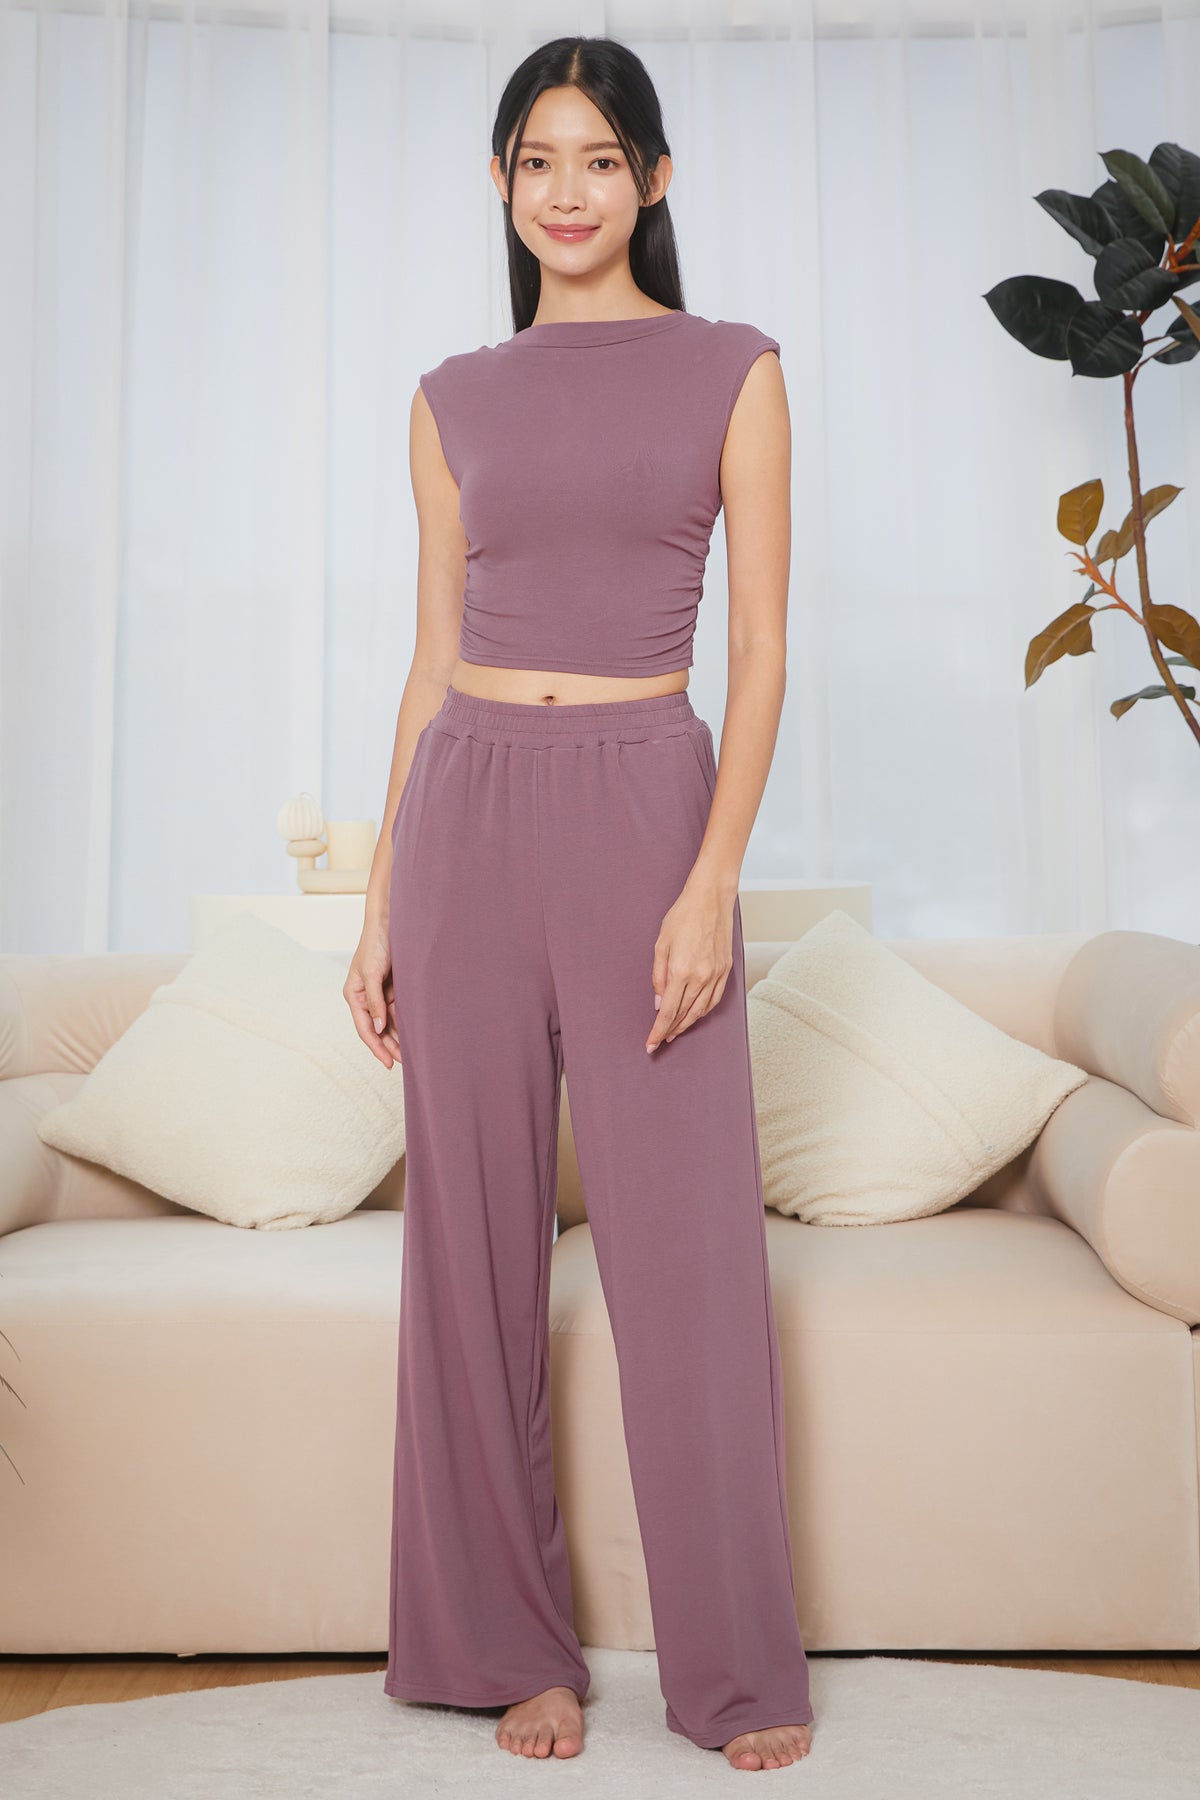 Ruched Sides Muscle Top in Mulberry